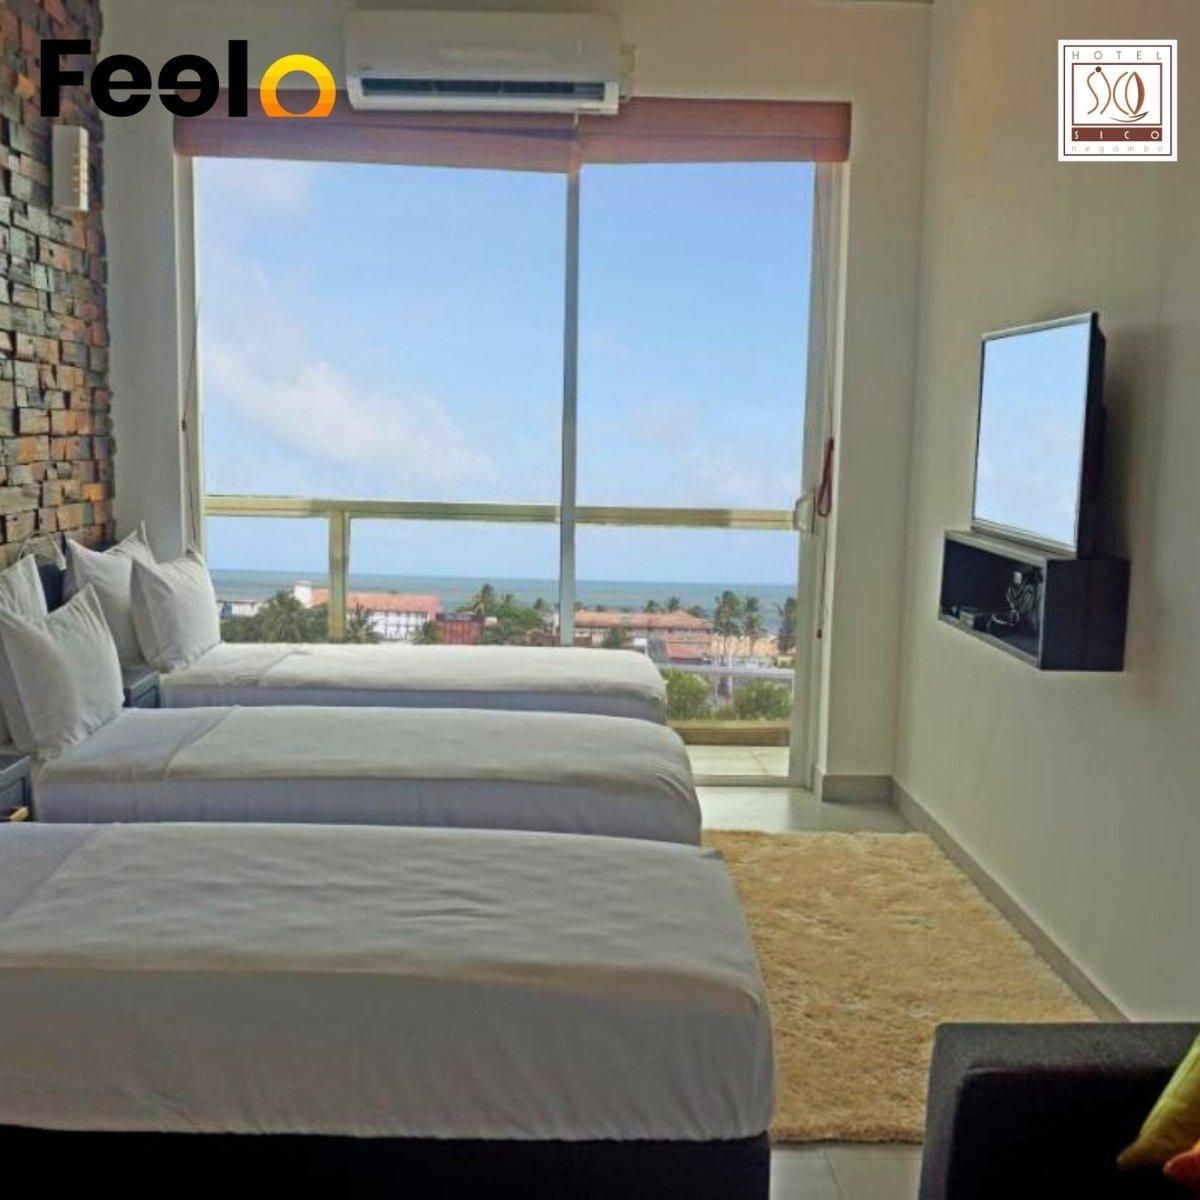 Day-stay, 1x Night stay, or 2x Night stay at Hotel Sico in Negombo for 2 people - Hotel Sico, Negombo | Feelo